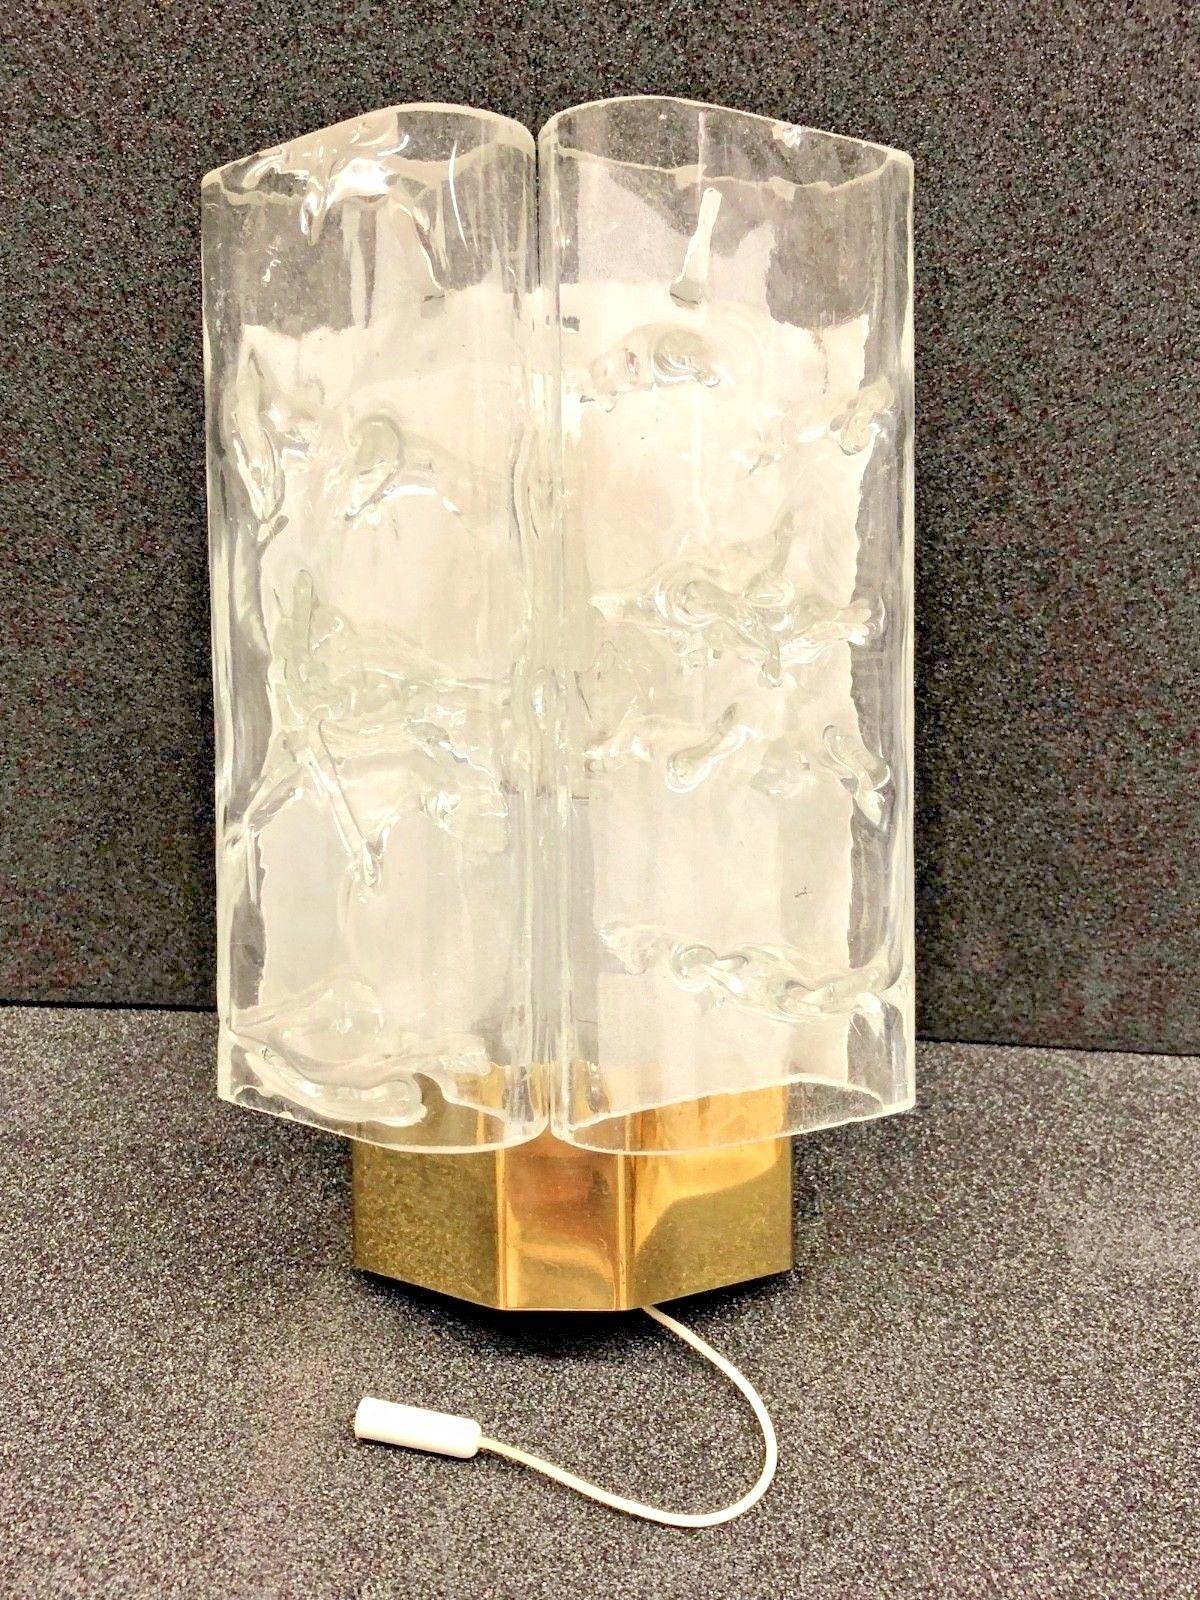 Elegant German Mid-Century Modern wall light with two clear textured glass tubes with brass base and mounted on white lacquered metal. Manufactured by German Doria Leuchten in the 1960s. Original pull switch that works perfectly. This fixture